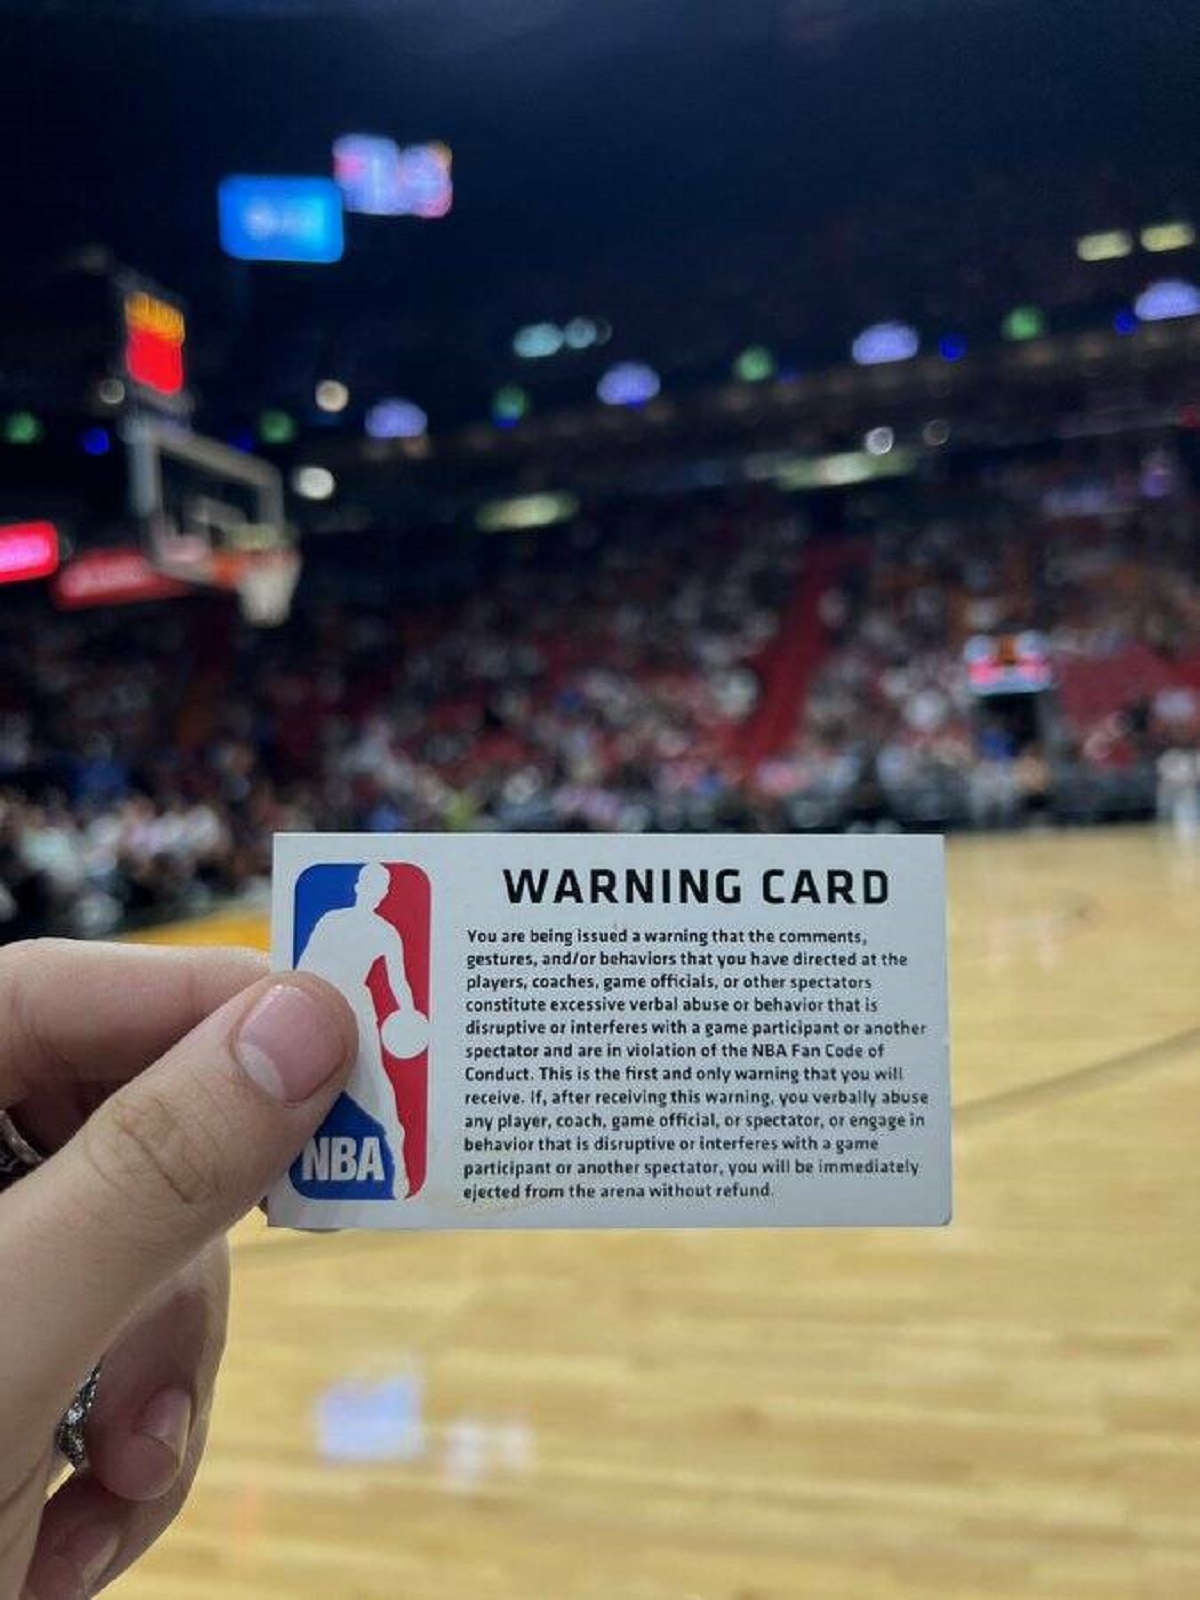 nba fan warning card - Nba Warning Card You are being issued a warning that the , gestures, andor behaviors that you have directed at the players, coaches, game officials, or other spectators constitute excessive verbal abuse or behavior that is disruptiv